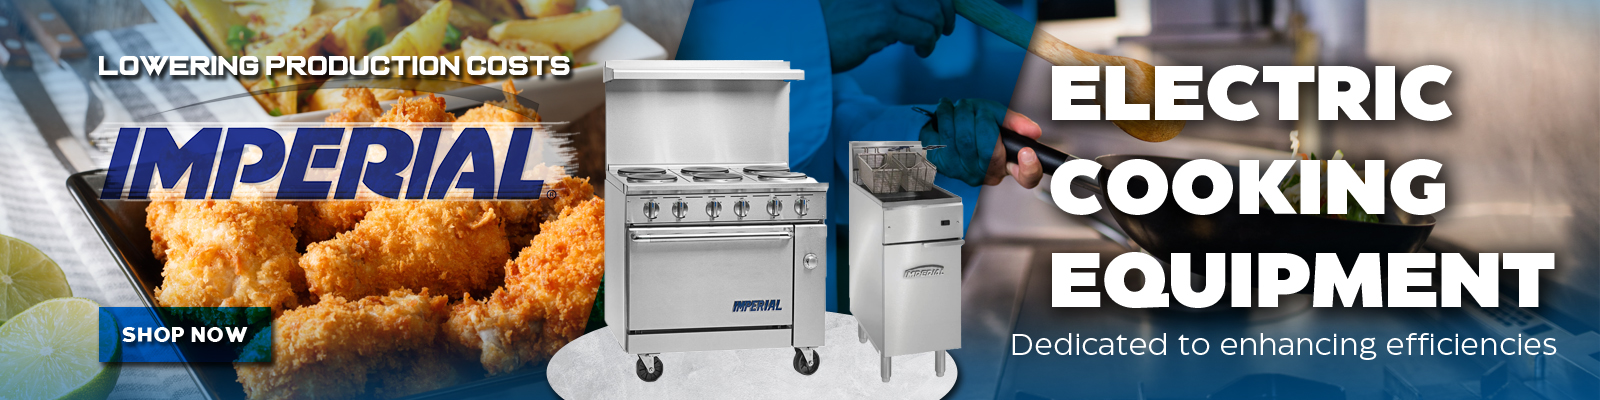 Imperial Commercial Electric Cooking Equipment & Supplies